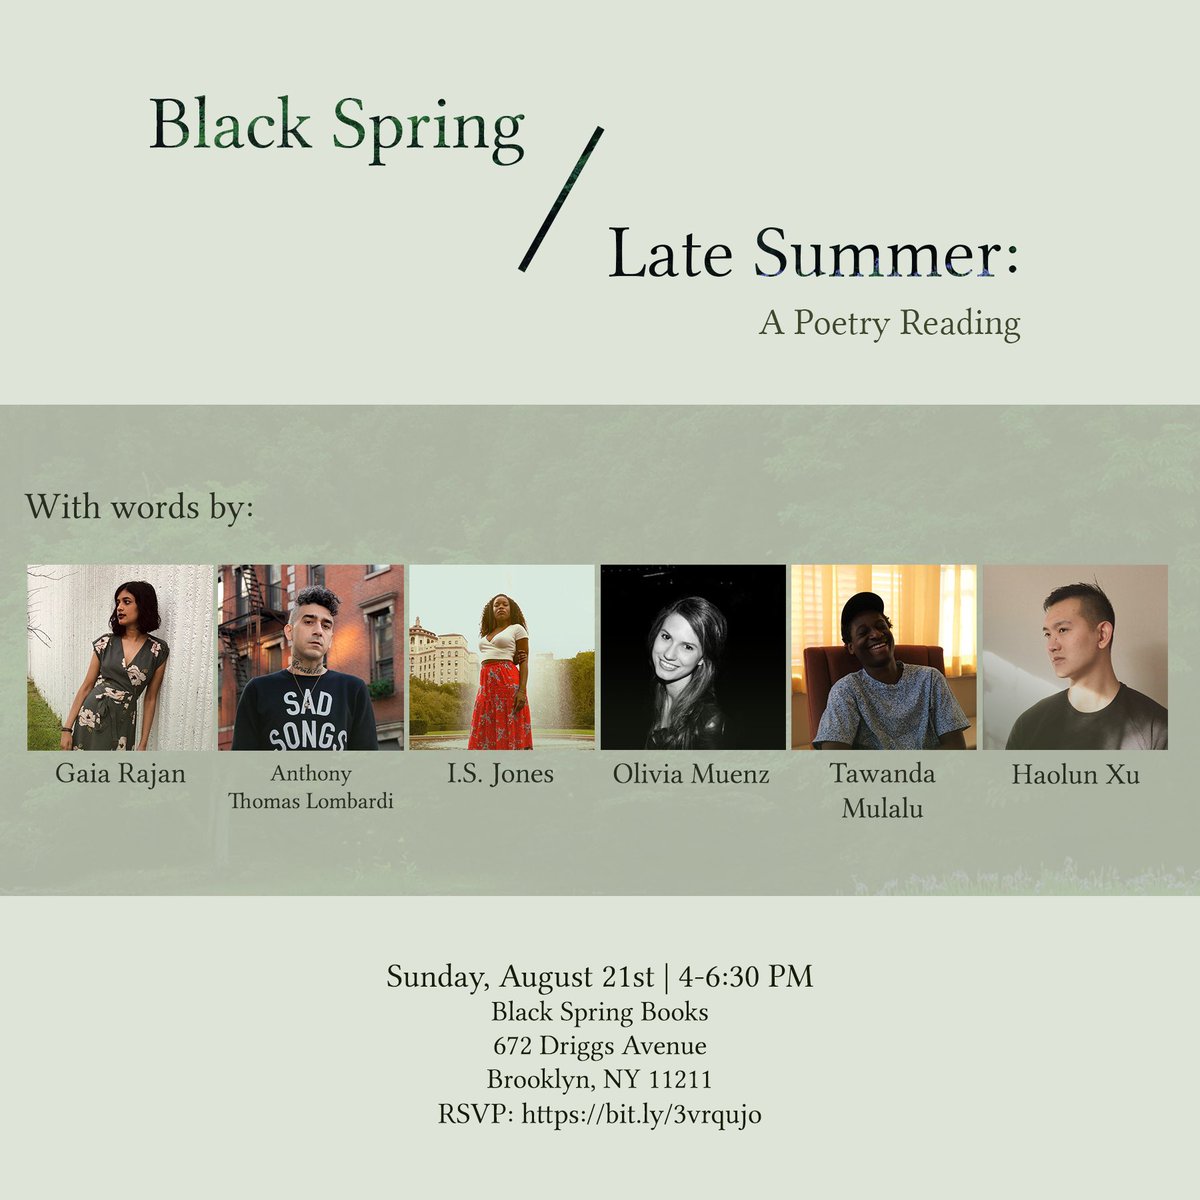 NYC public service announcement that myself and friends will be reading at @blackspringbk tomorrow. 

Come out and hang with us! (@gaiarajan @isjonespoetry  @oliviamuenz @haolun1 etc, etc--)